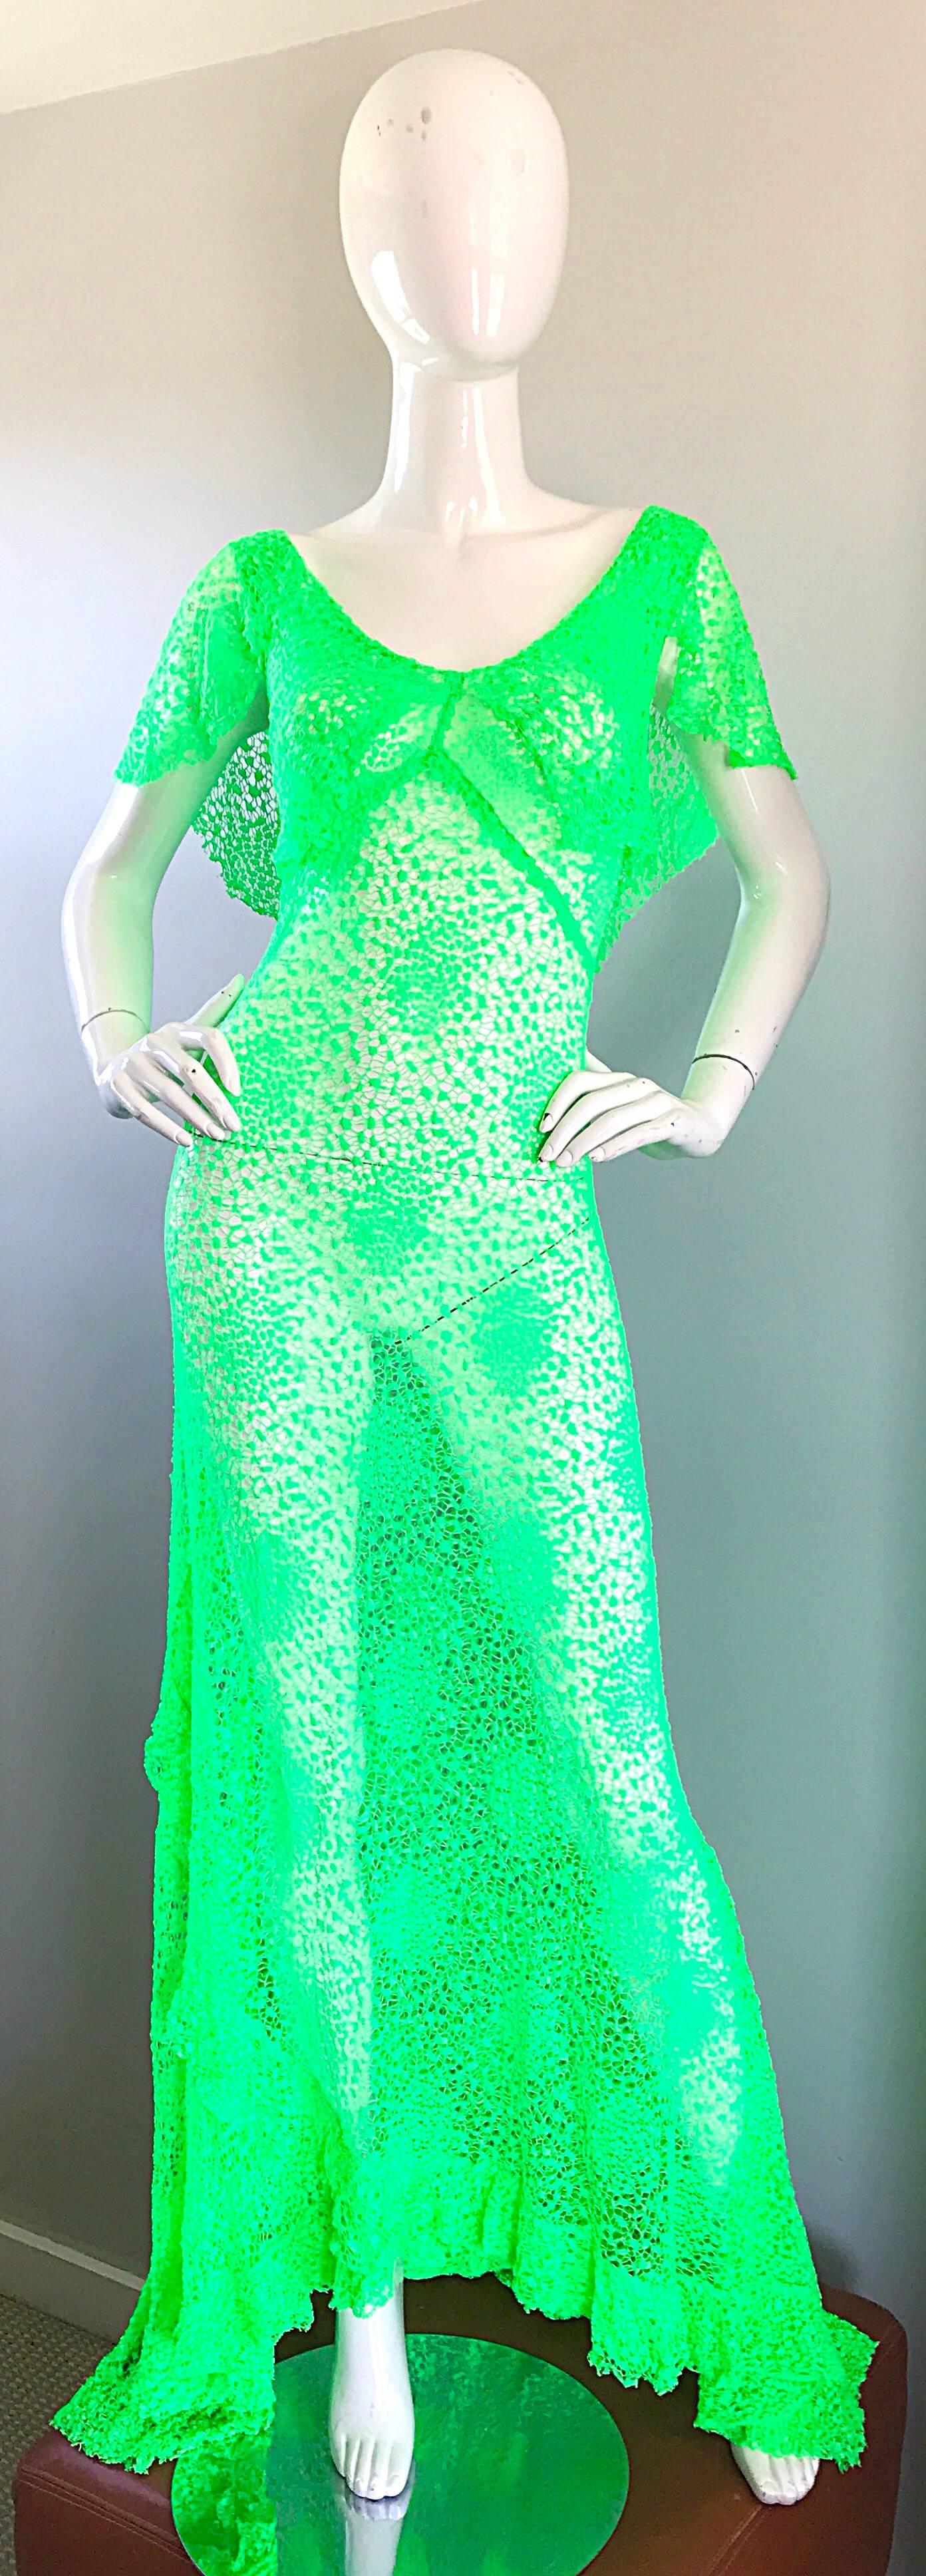 neon green gown